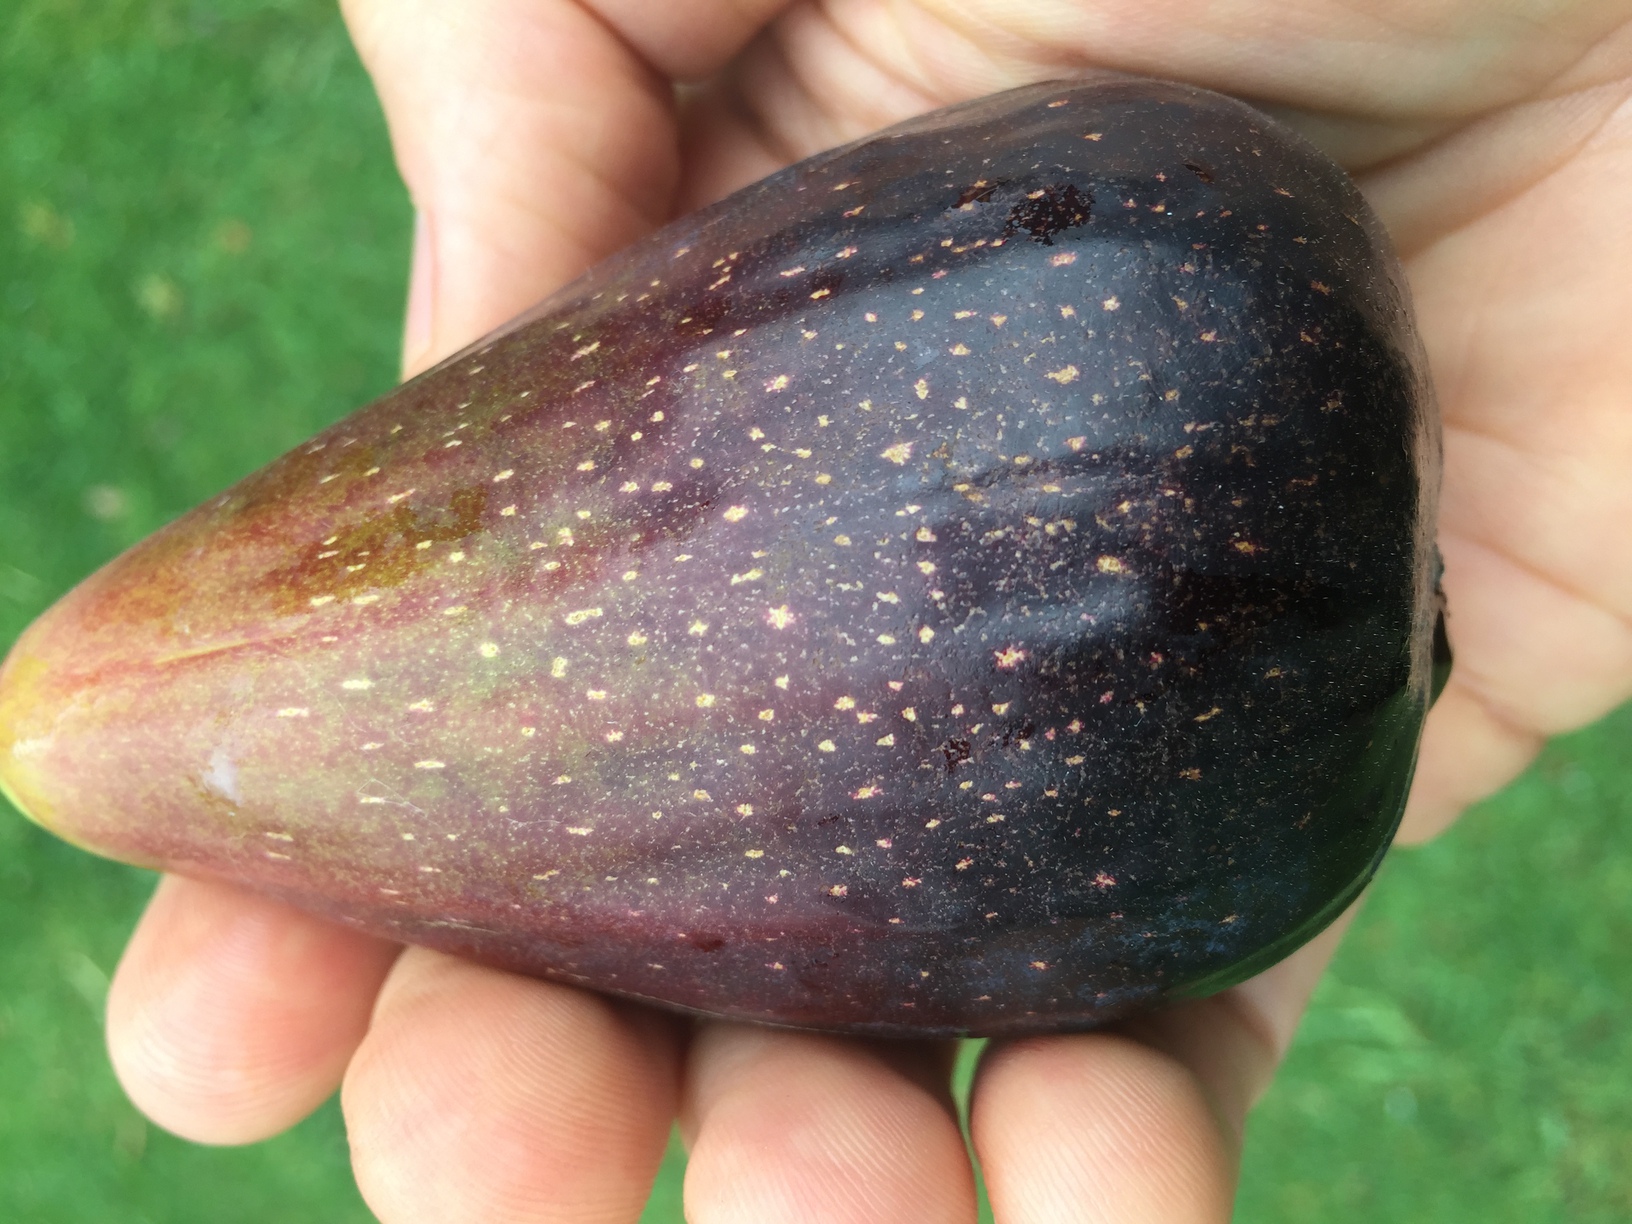 This is the first fig for 2020. There was an initial flush of maybe 10 figs or so, this being the first ripe one, but the second flush looks like almost 10 times as many as the first flush!